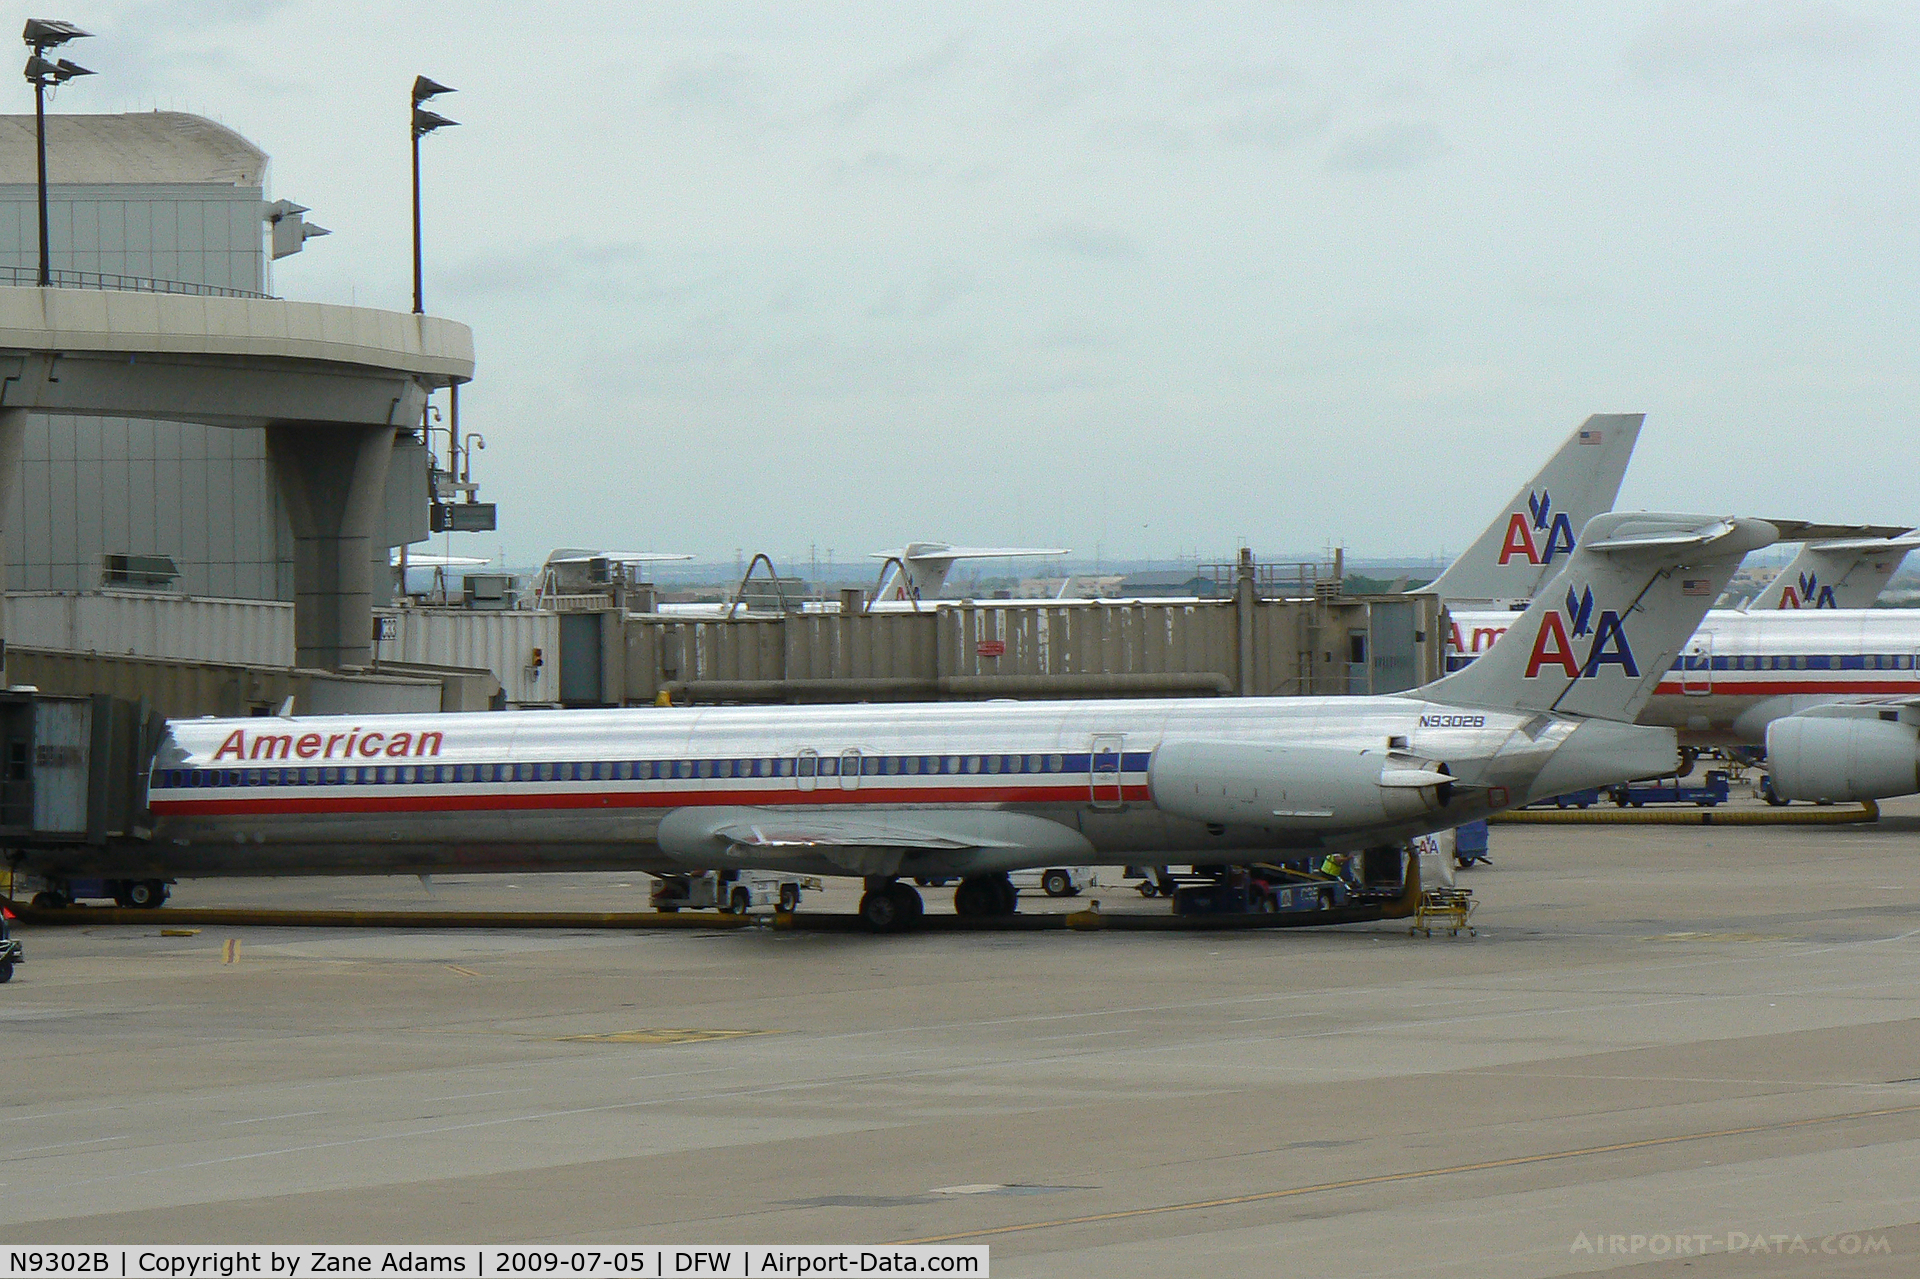 N9302B, 1987 McDonnell Douglas MD-83 (DC-9-83) C/N 49528, American Airlines at the gate - DFW